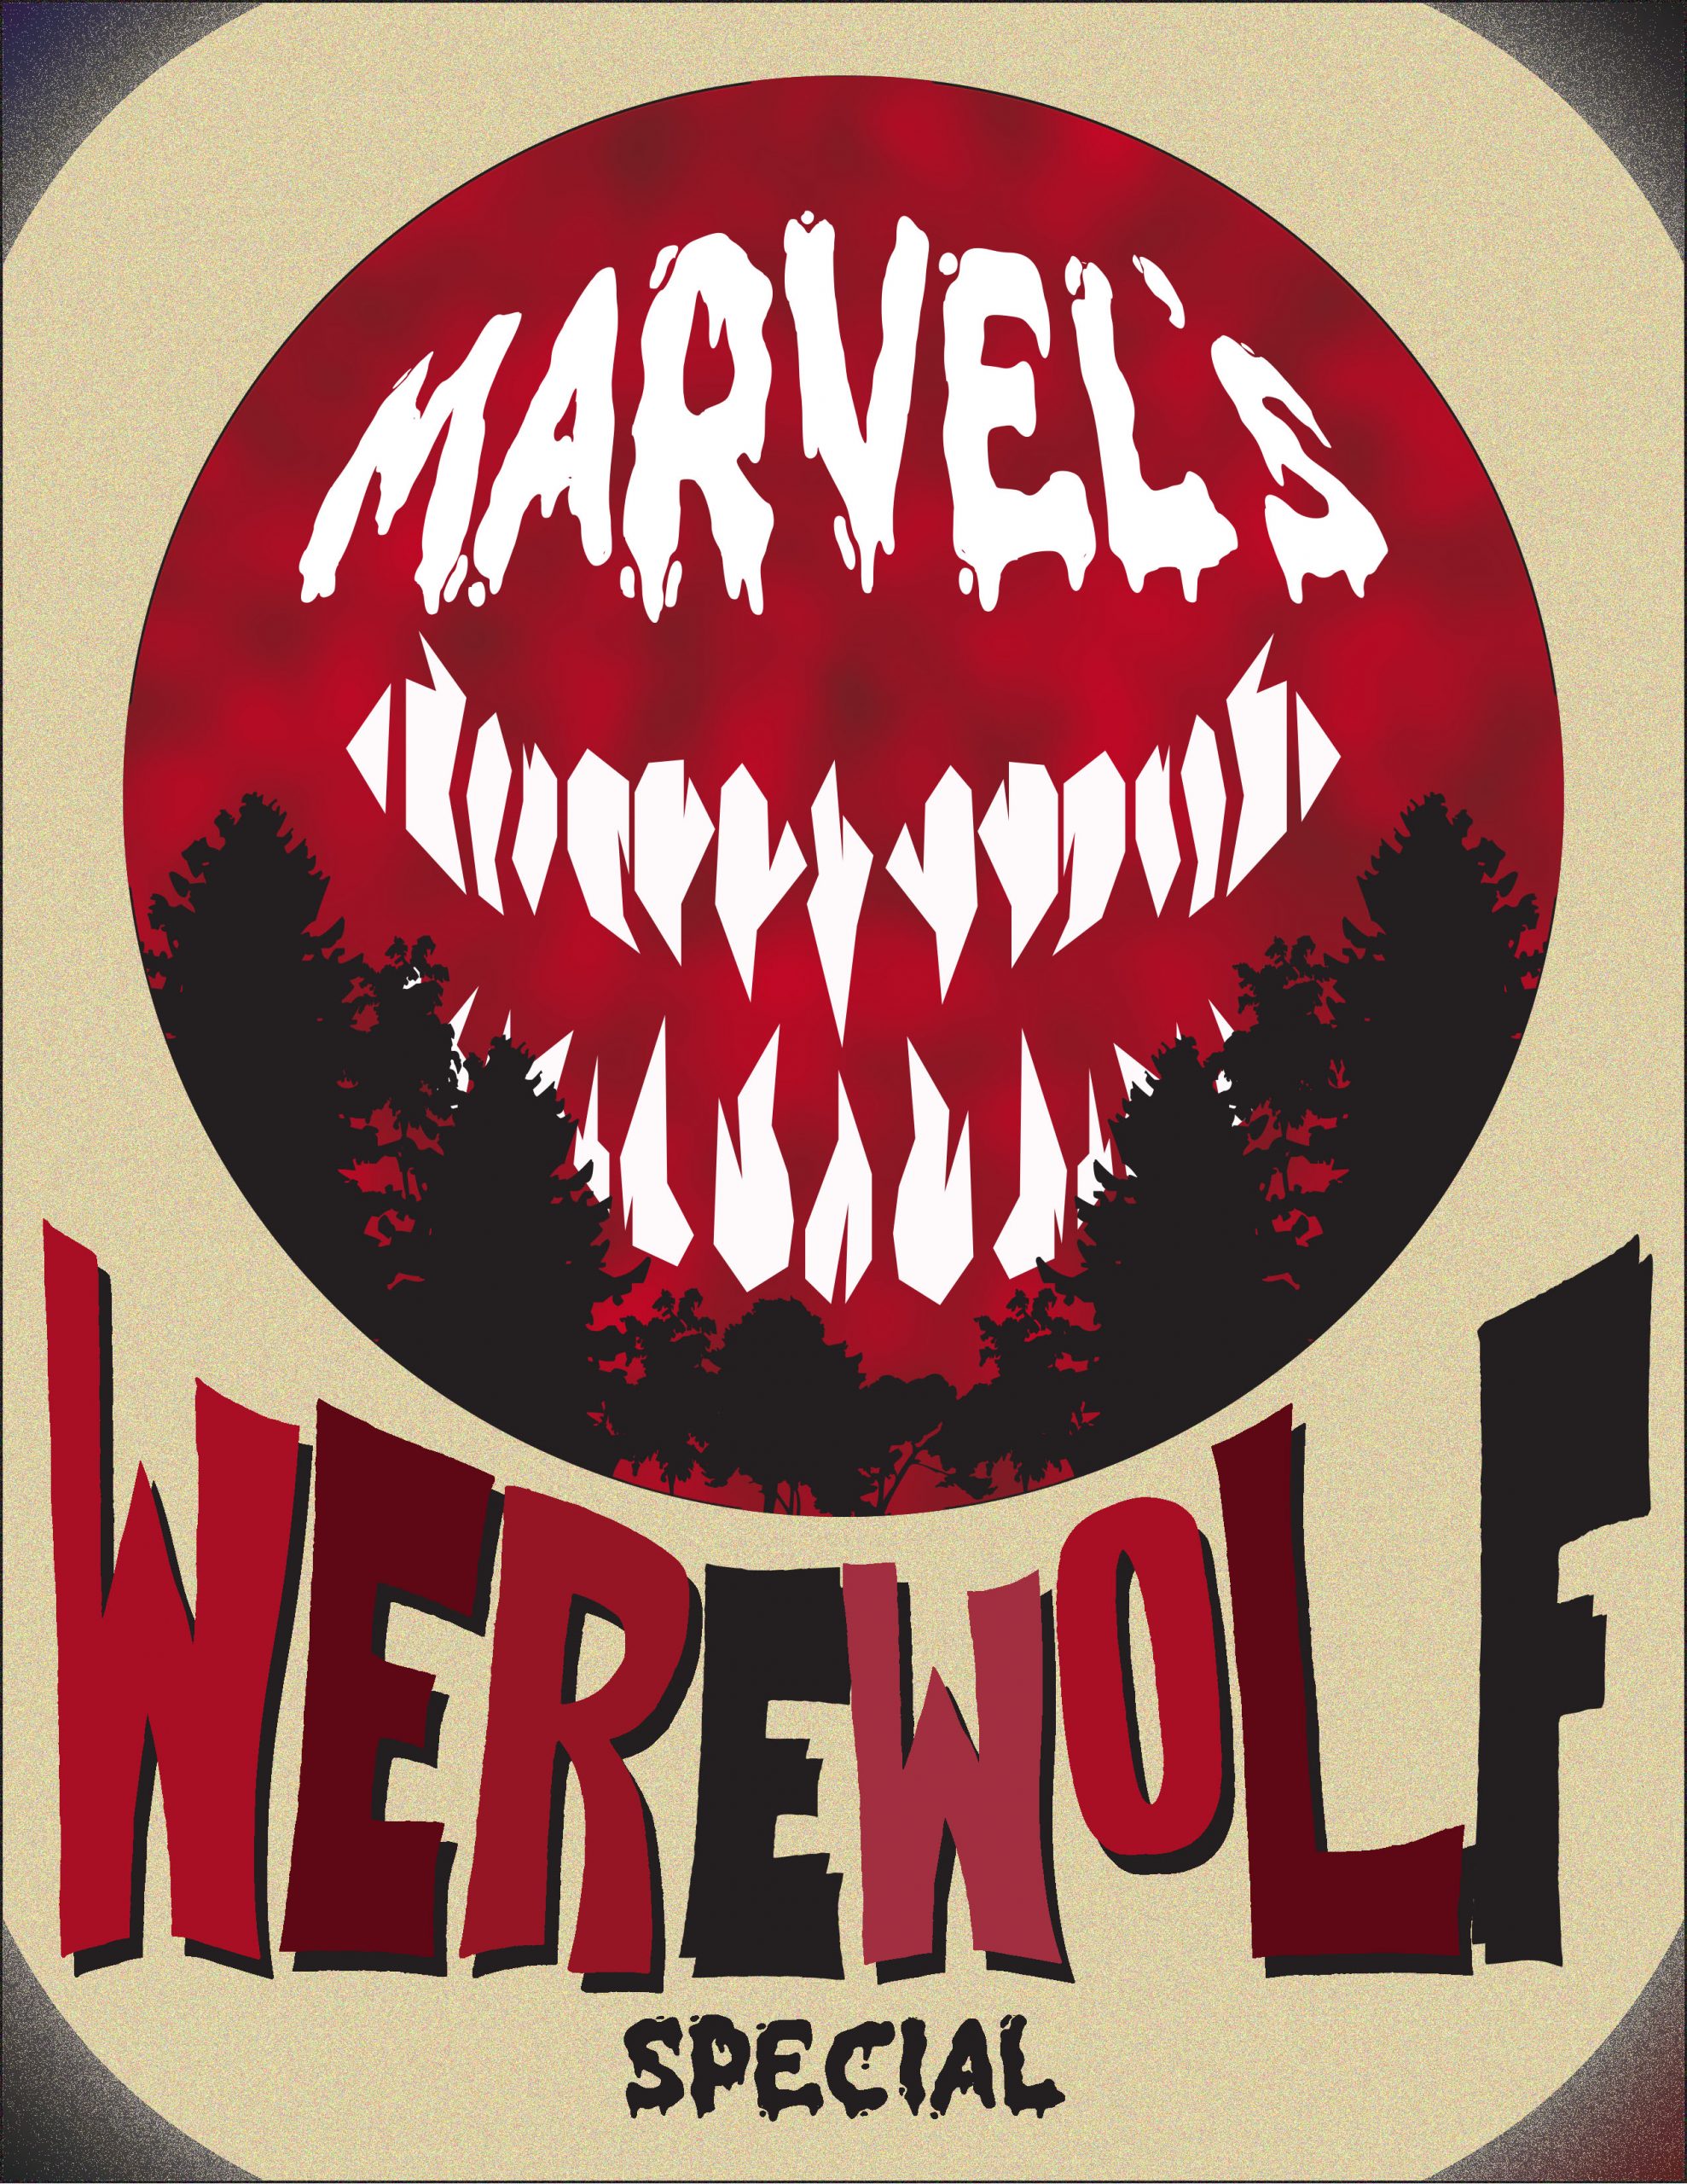 Werewolf by Night Review: Marvel Goes Full Horror in Halloween Special